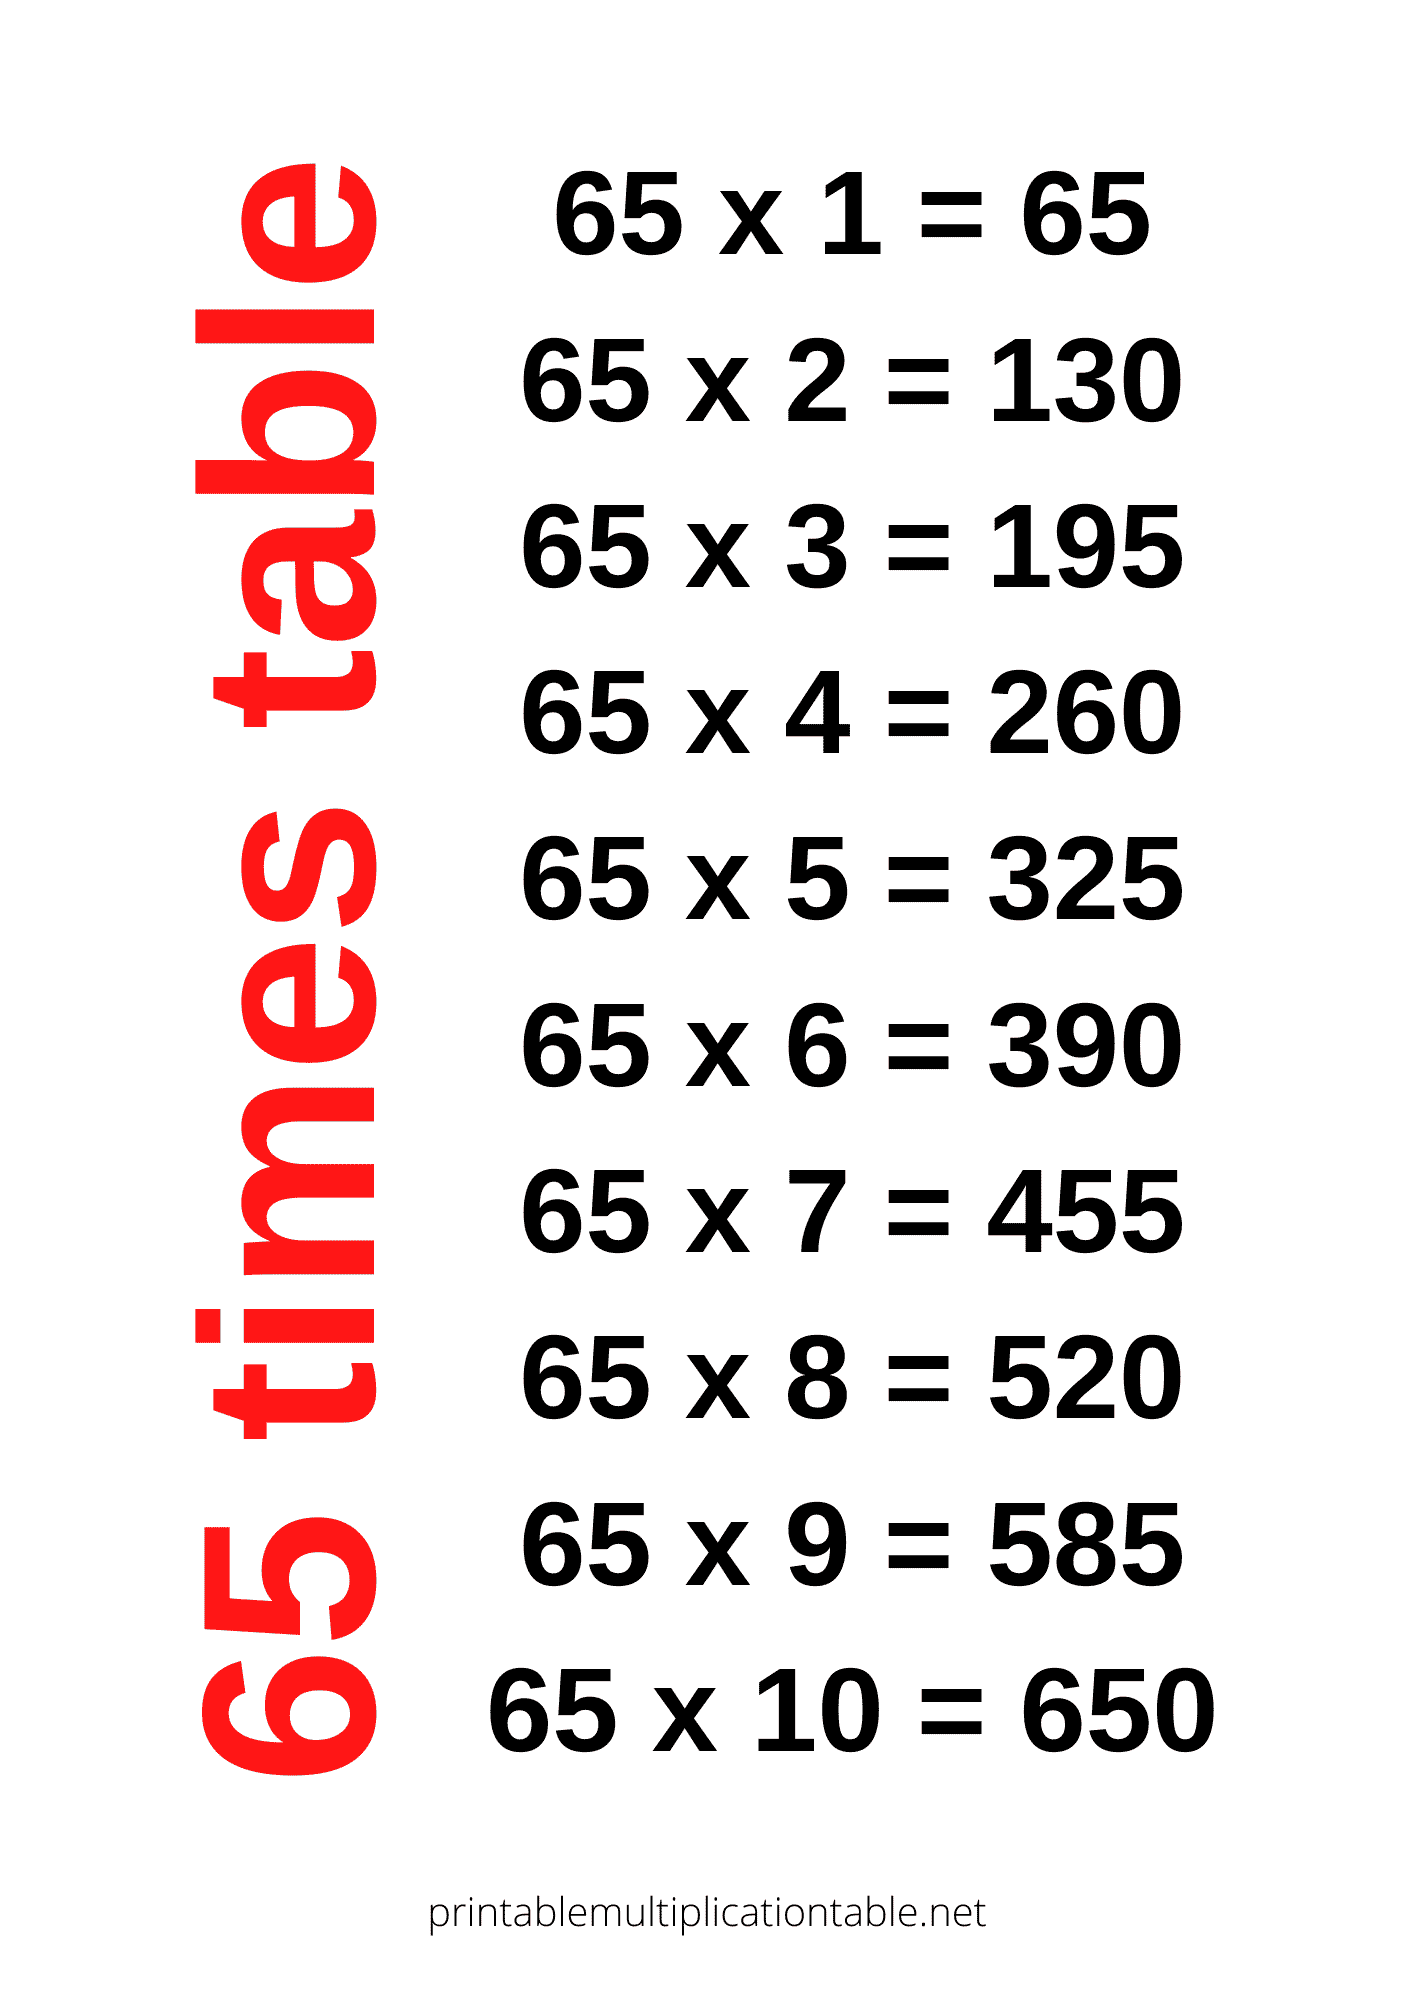 65 times table chart